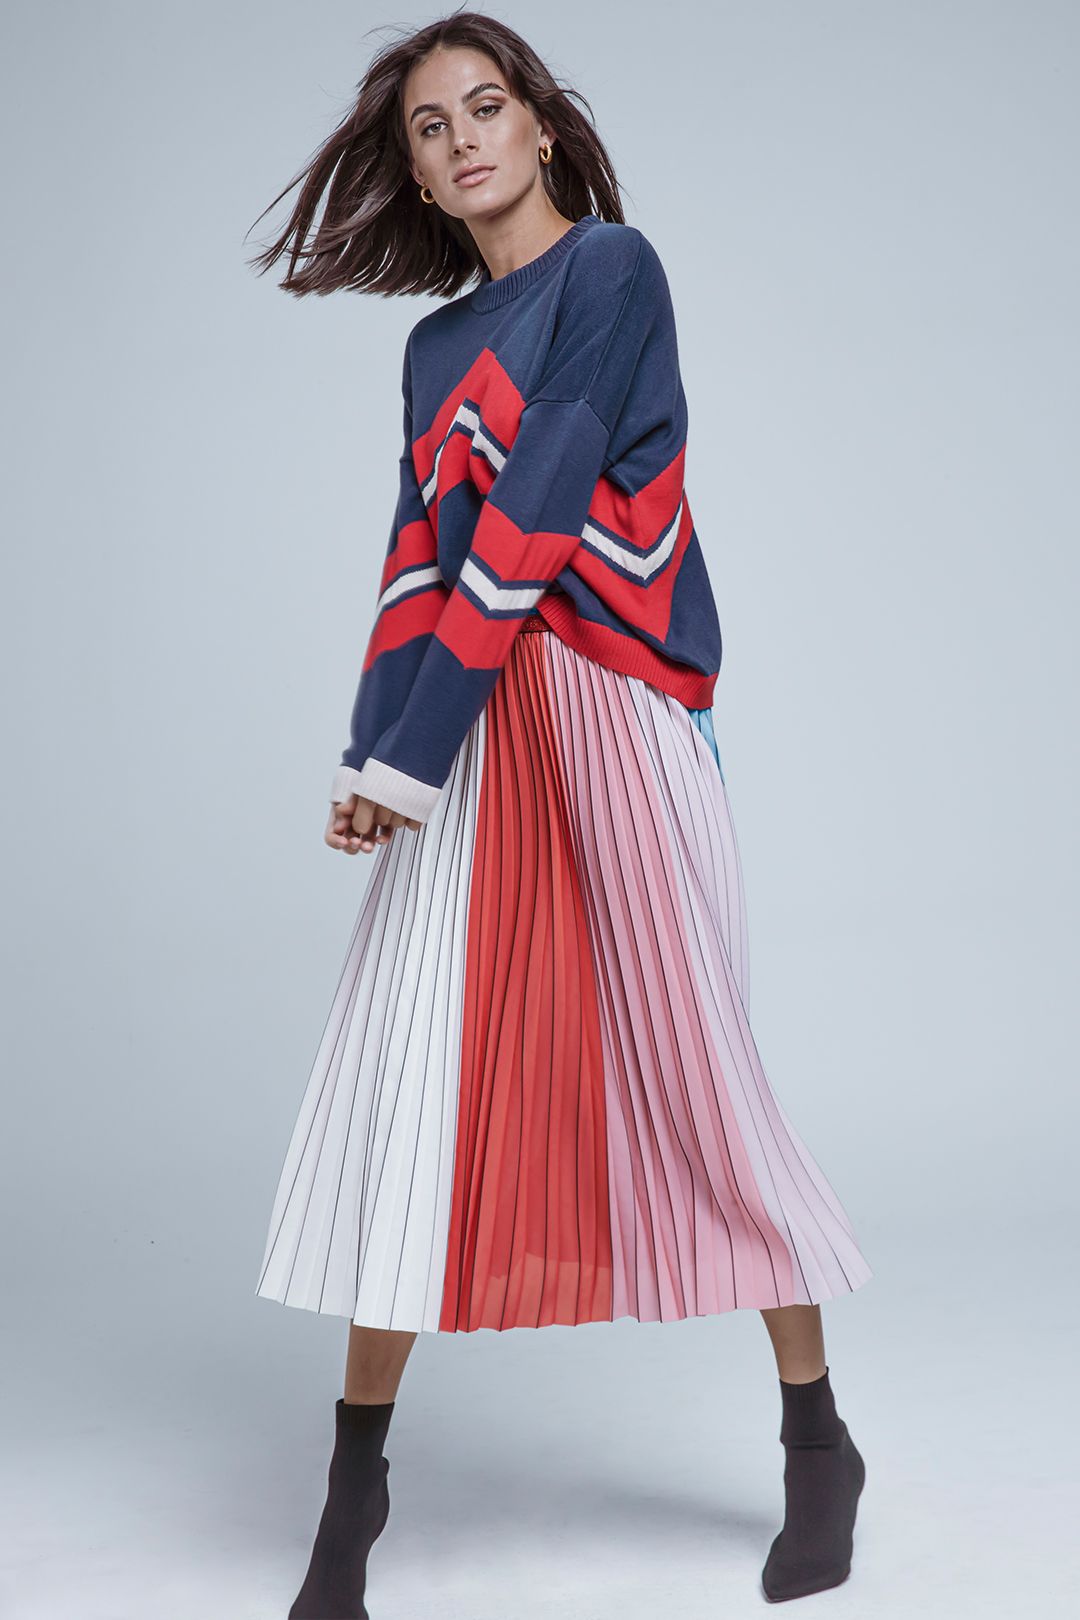 coop-by-trelise-cooper-let-them-pleat-cake-skirt-campaign